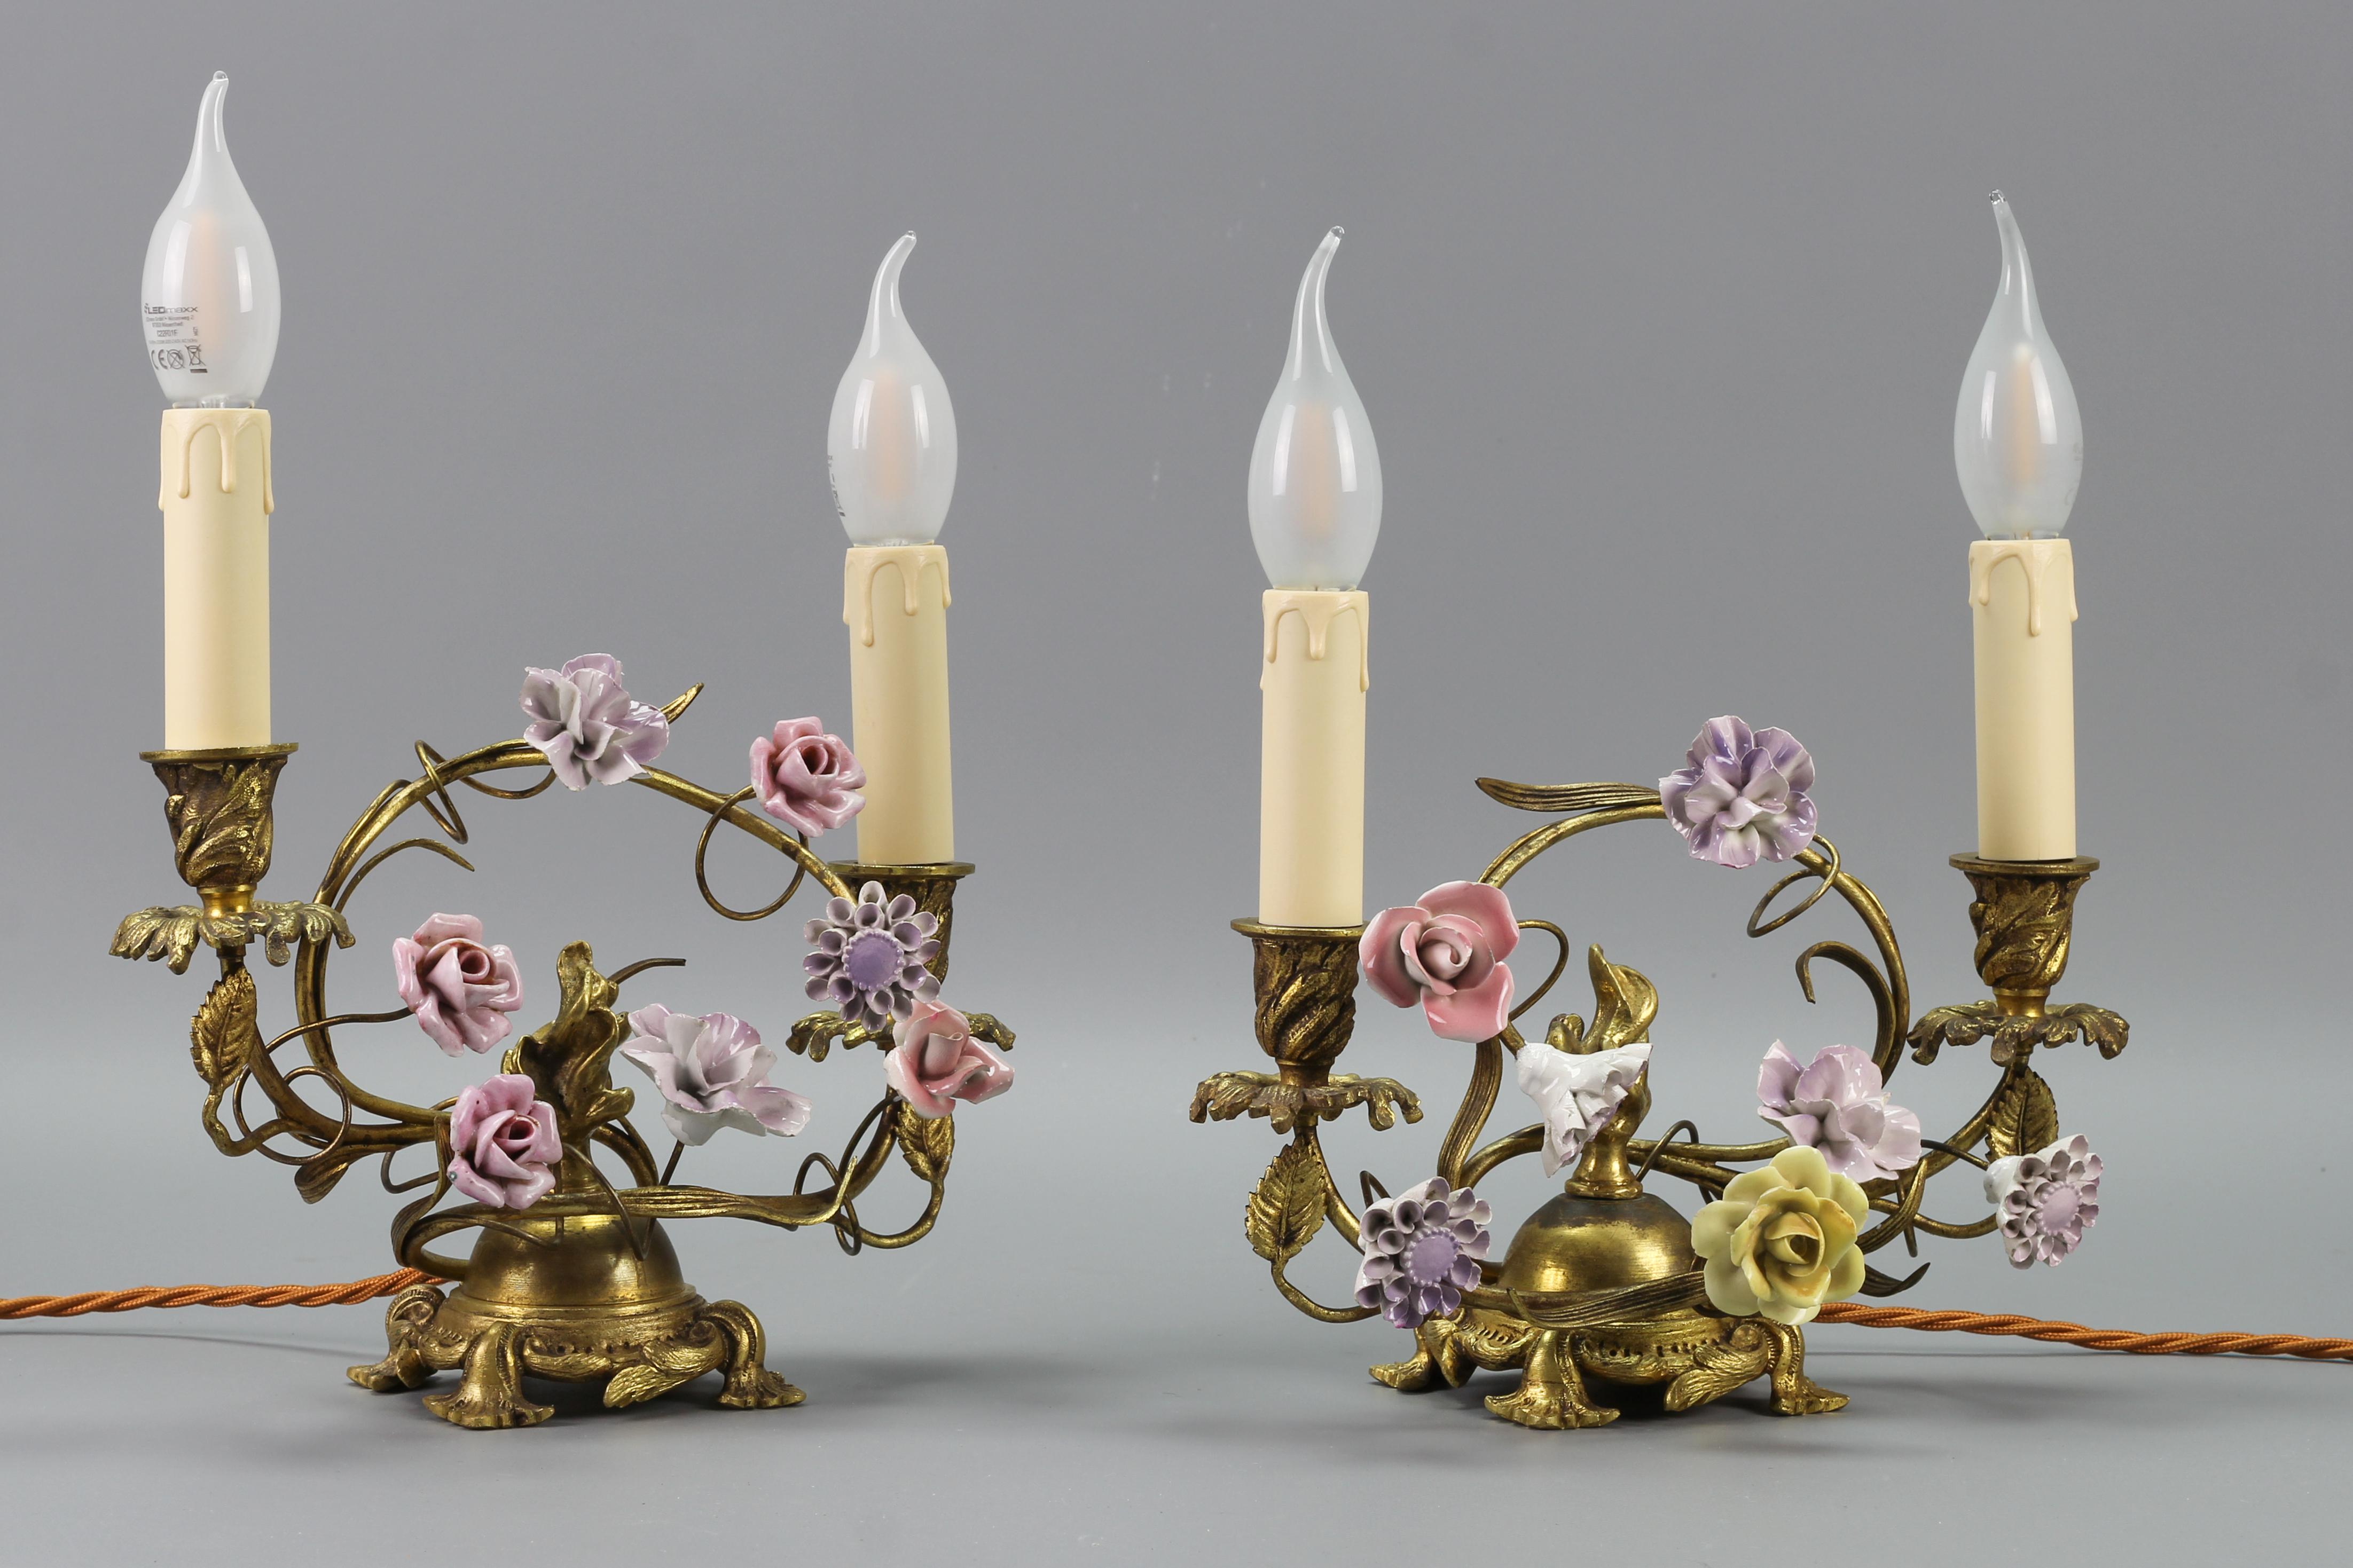 Pair of French Rococo Style Gilt Bronze and Porcelain Flower Table Lamps For Sale 2